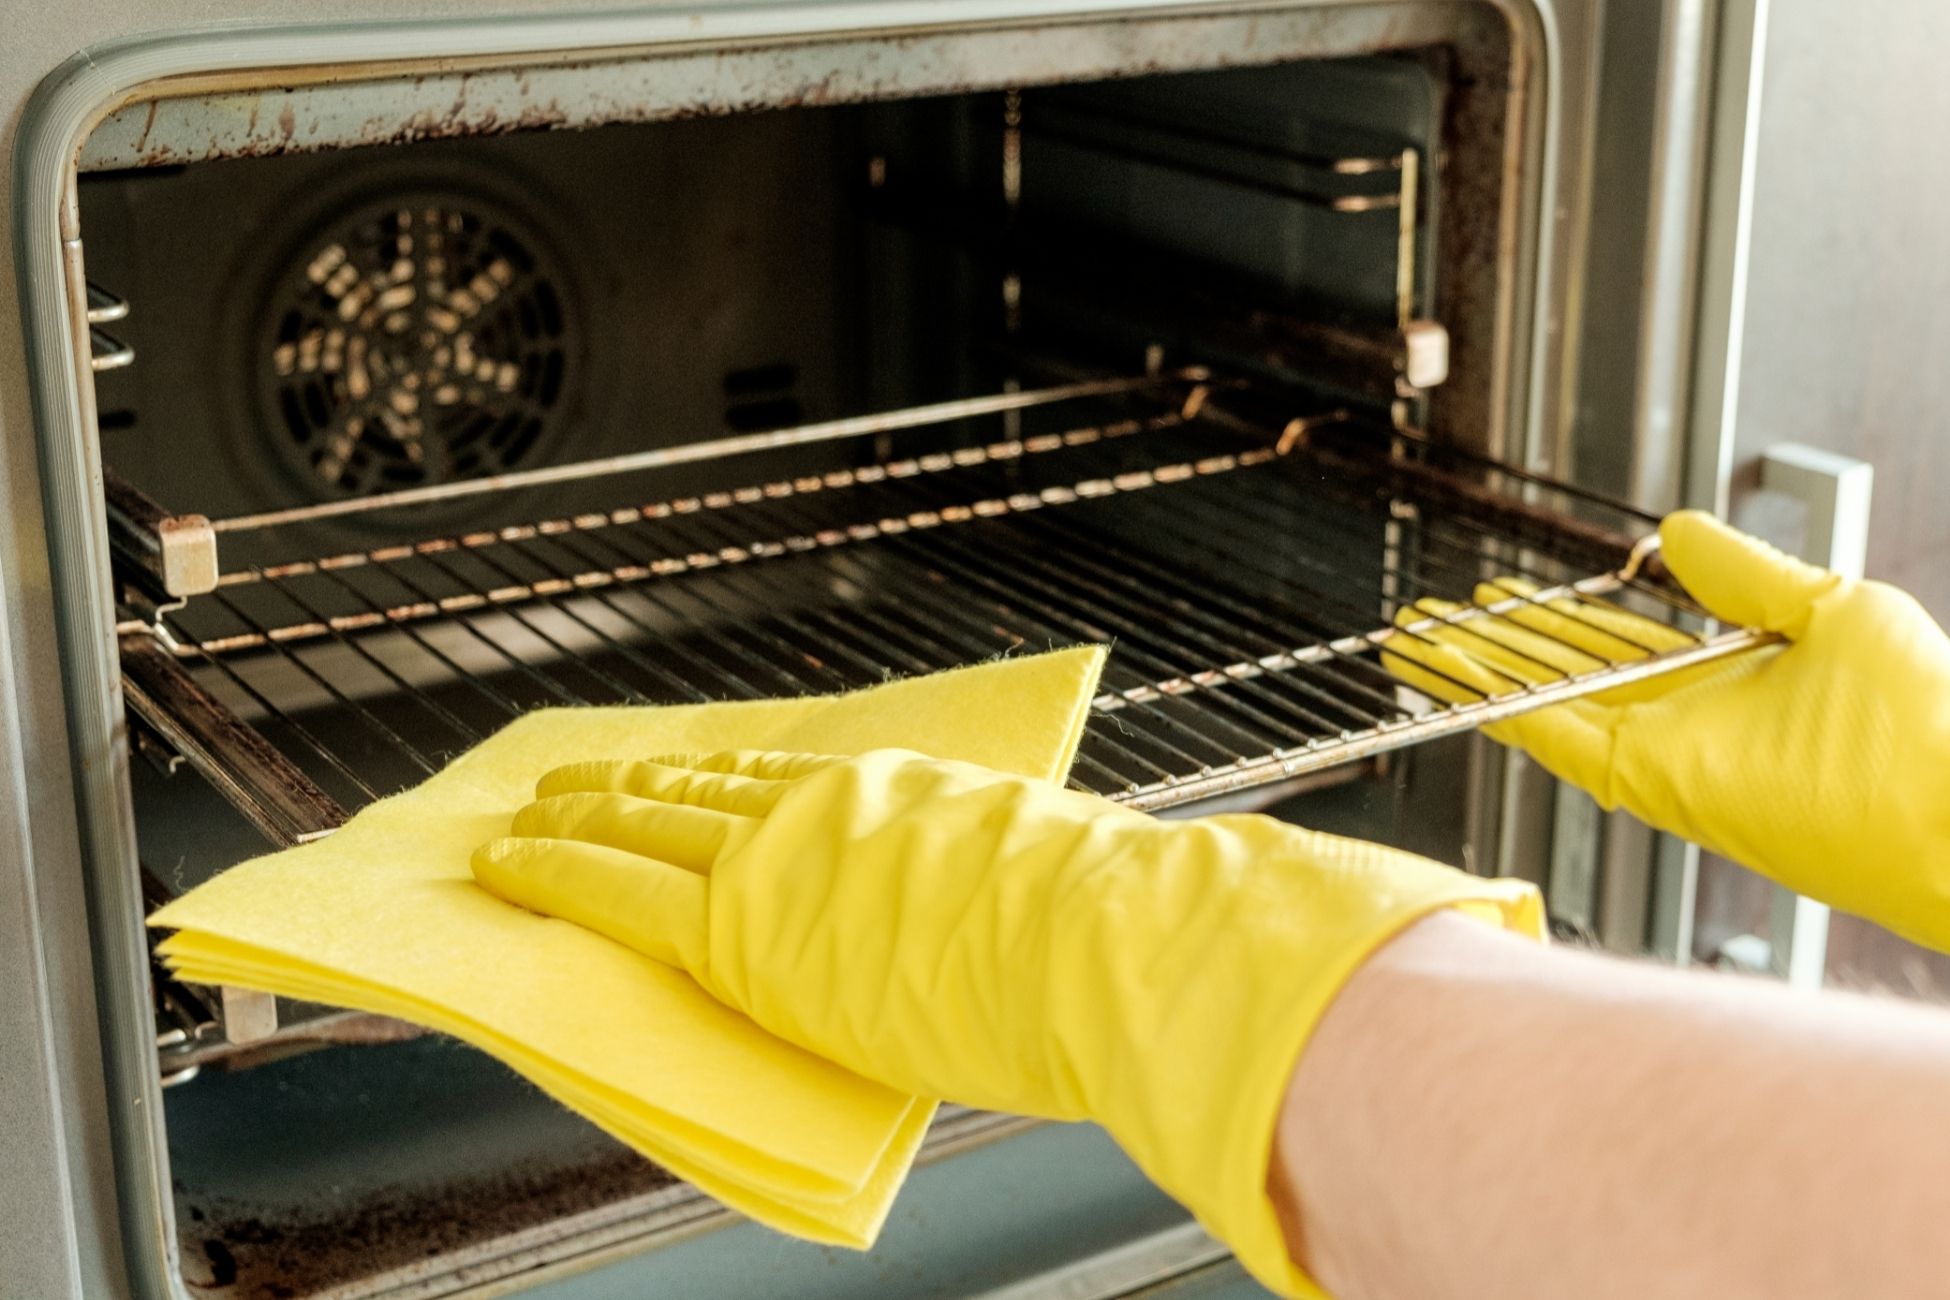 Things You Should Never Do with Oven Cleaner